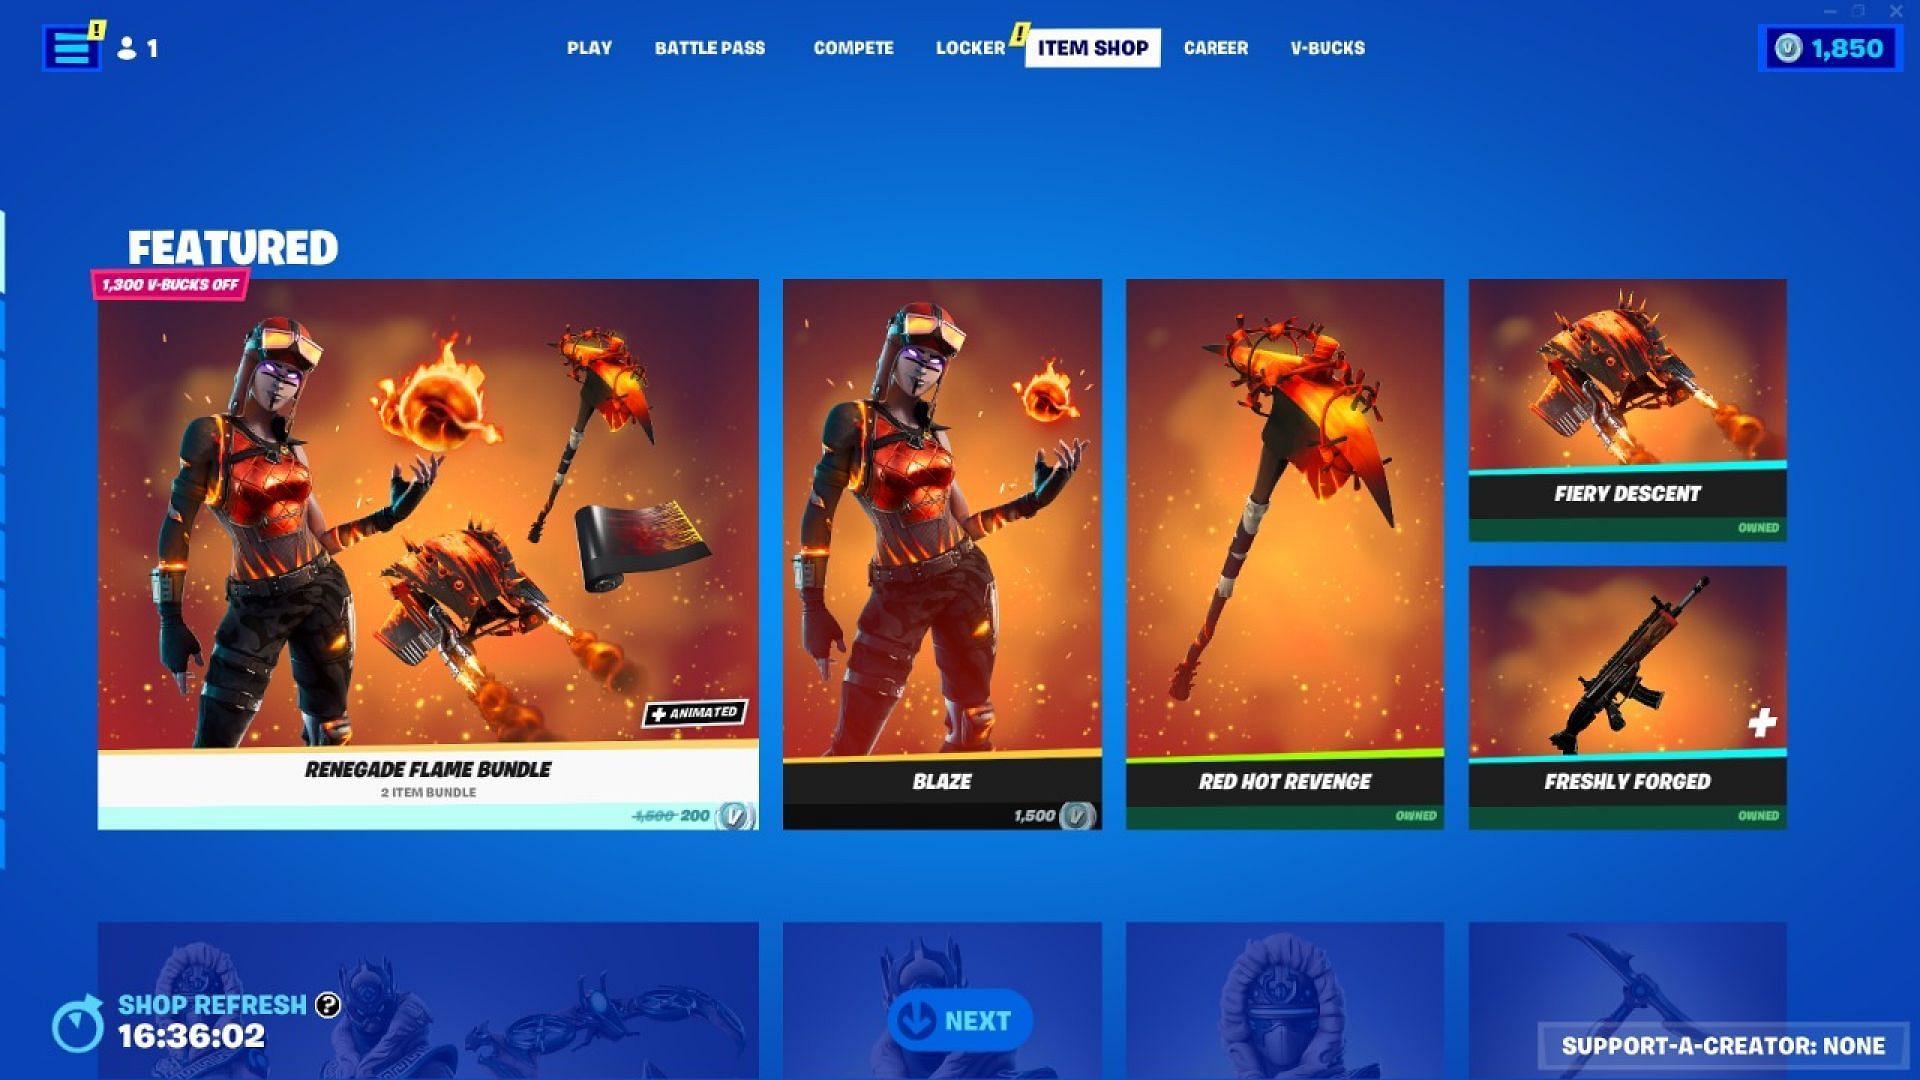 Purchasing Blaze for 200 V-Bucks is a steal (Image via Epic Games)